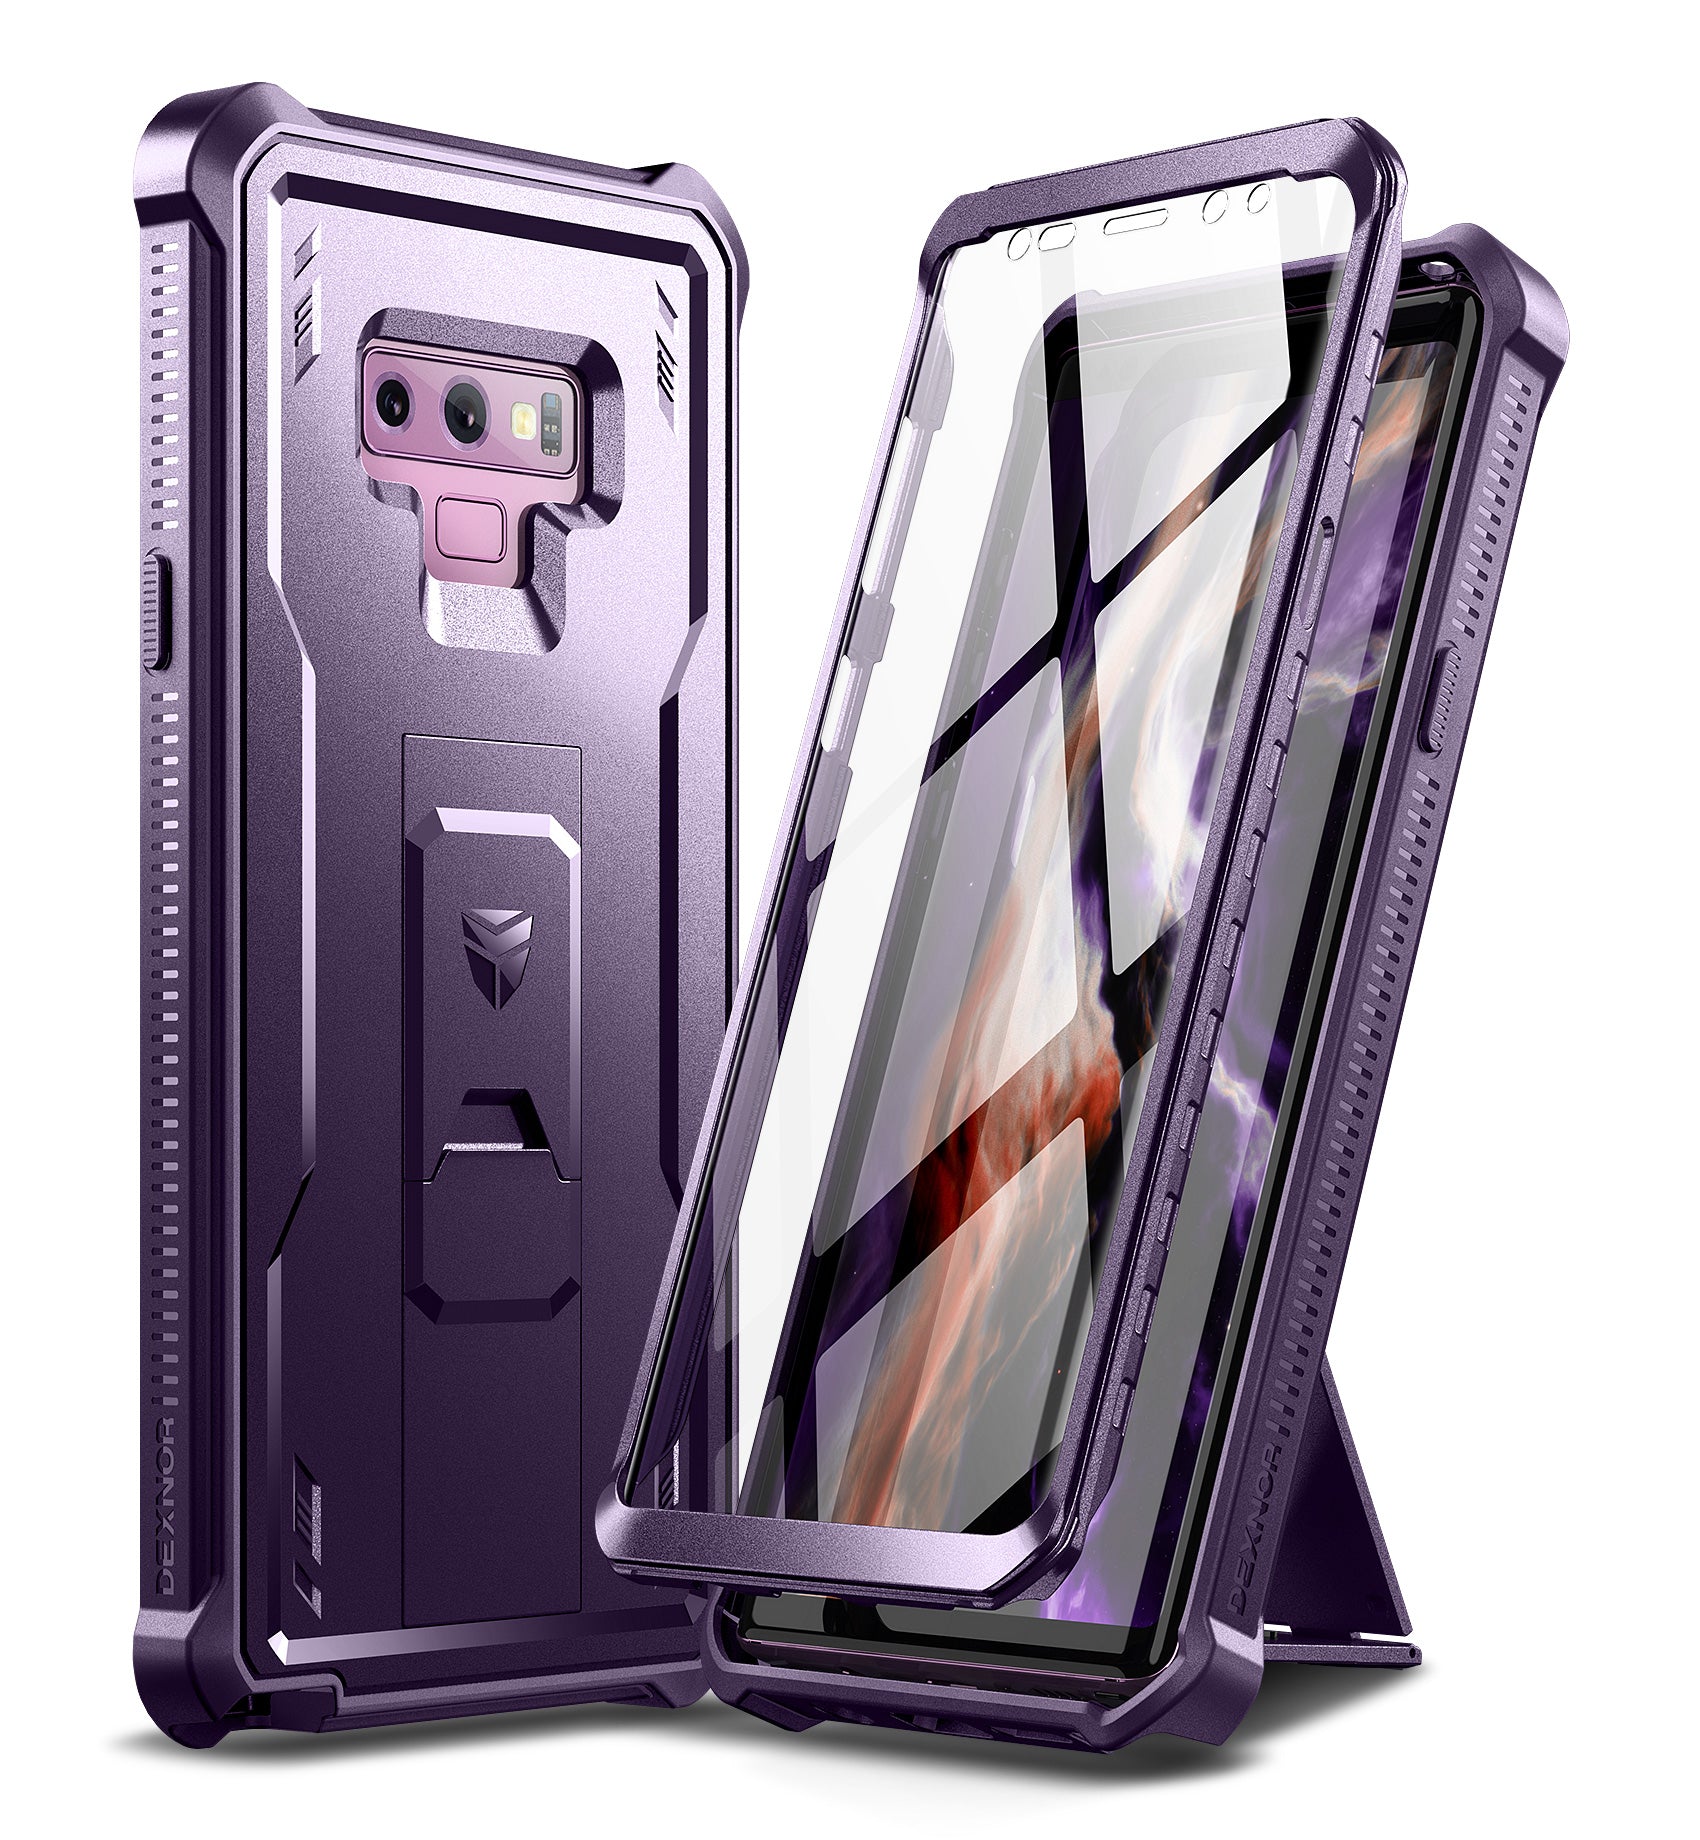 Case For Samsung Galaxy Note 9/6.4 inches, [Built in Screen Protector and Kickstand]